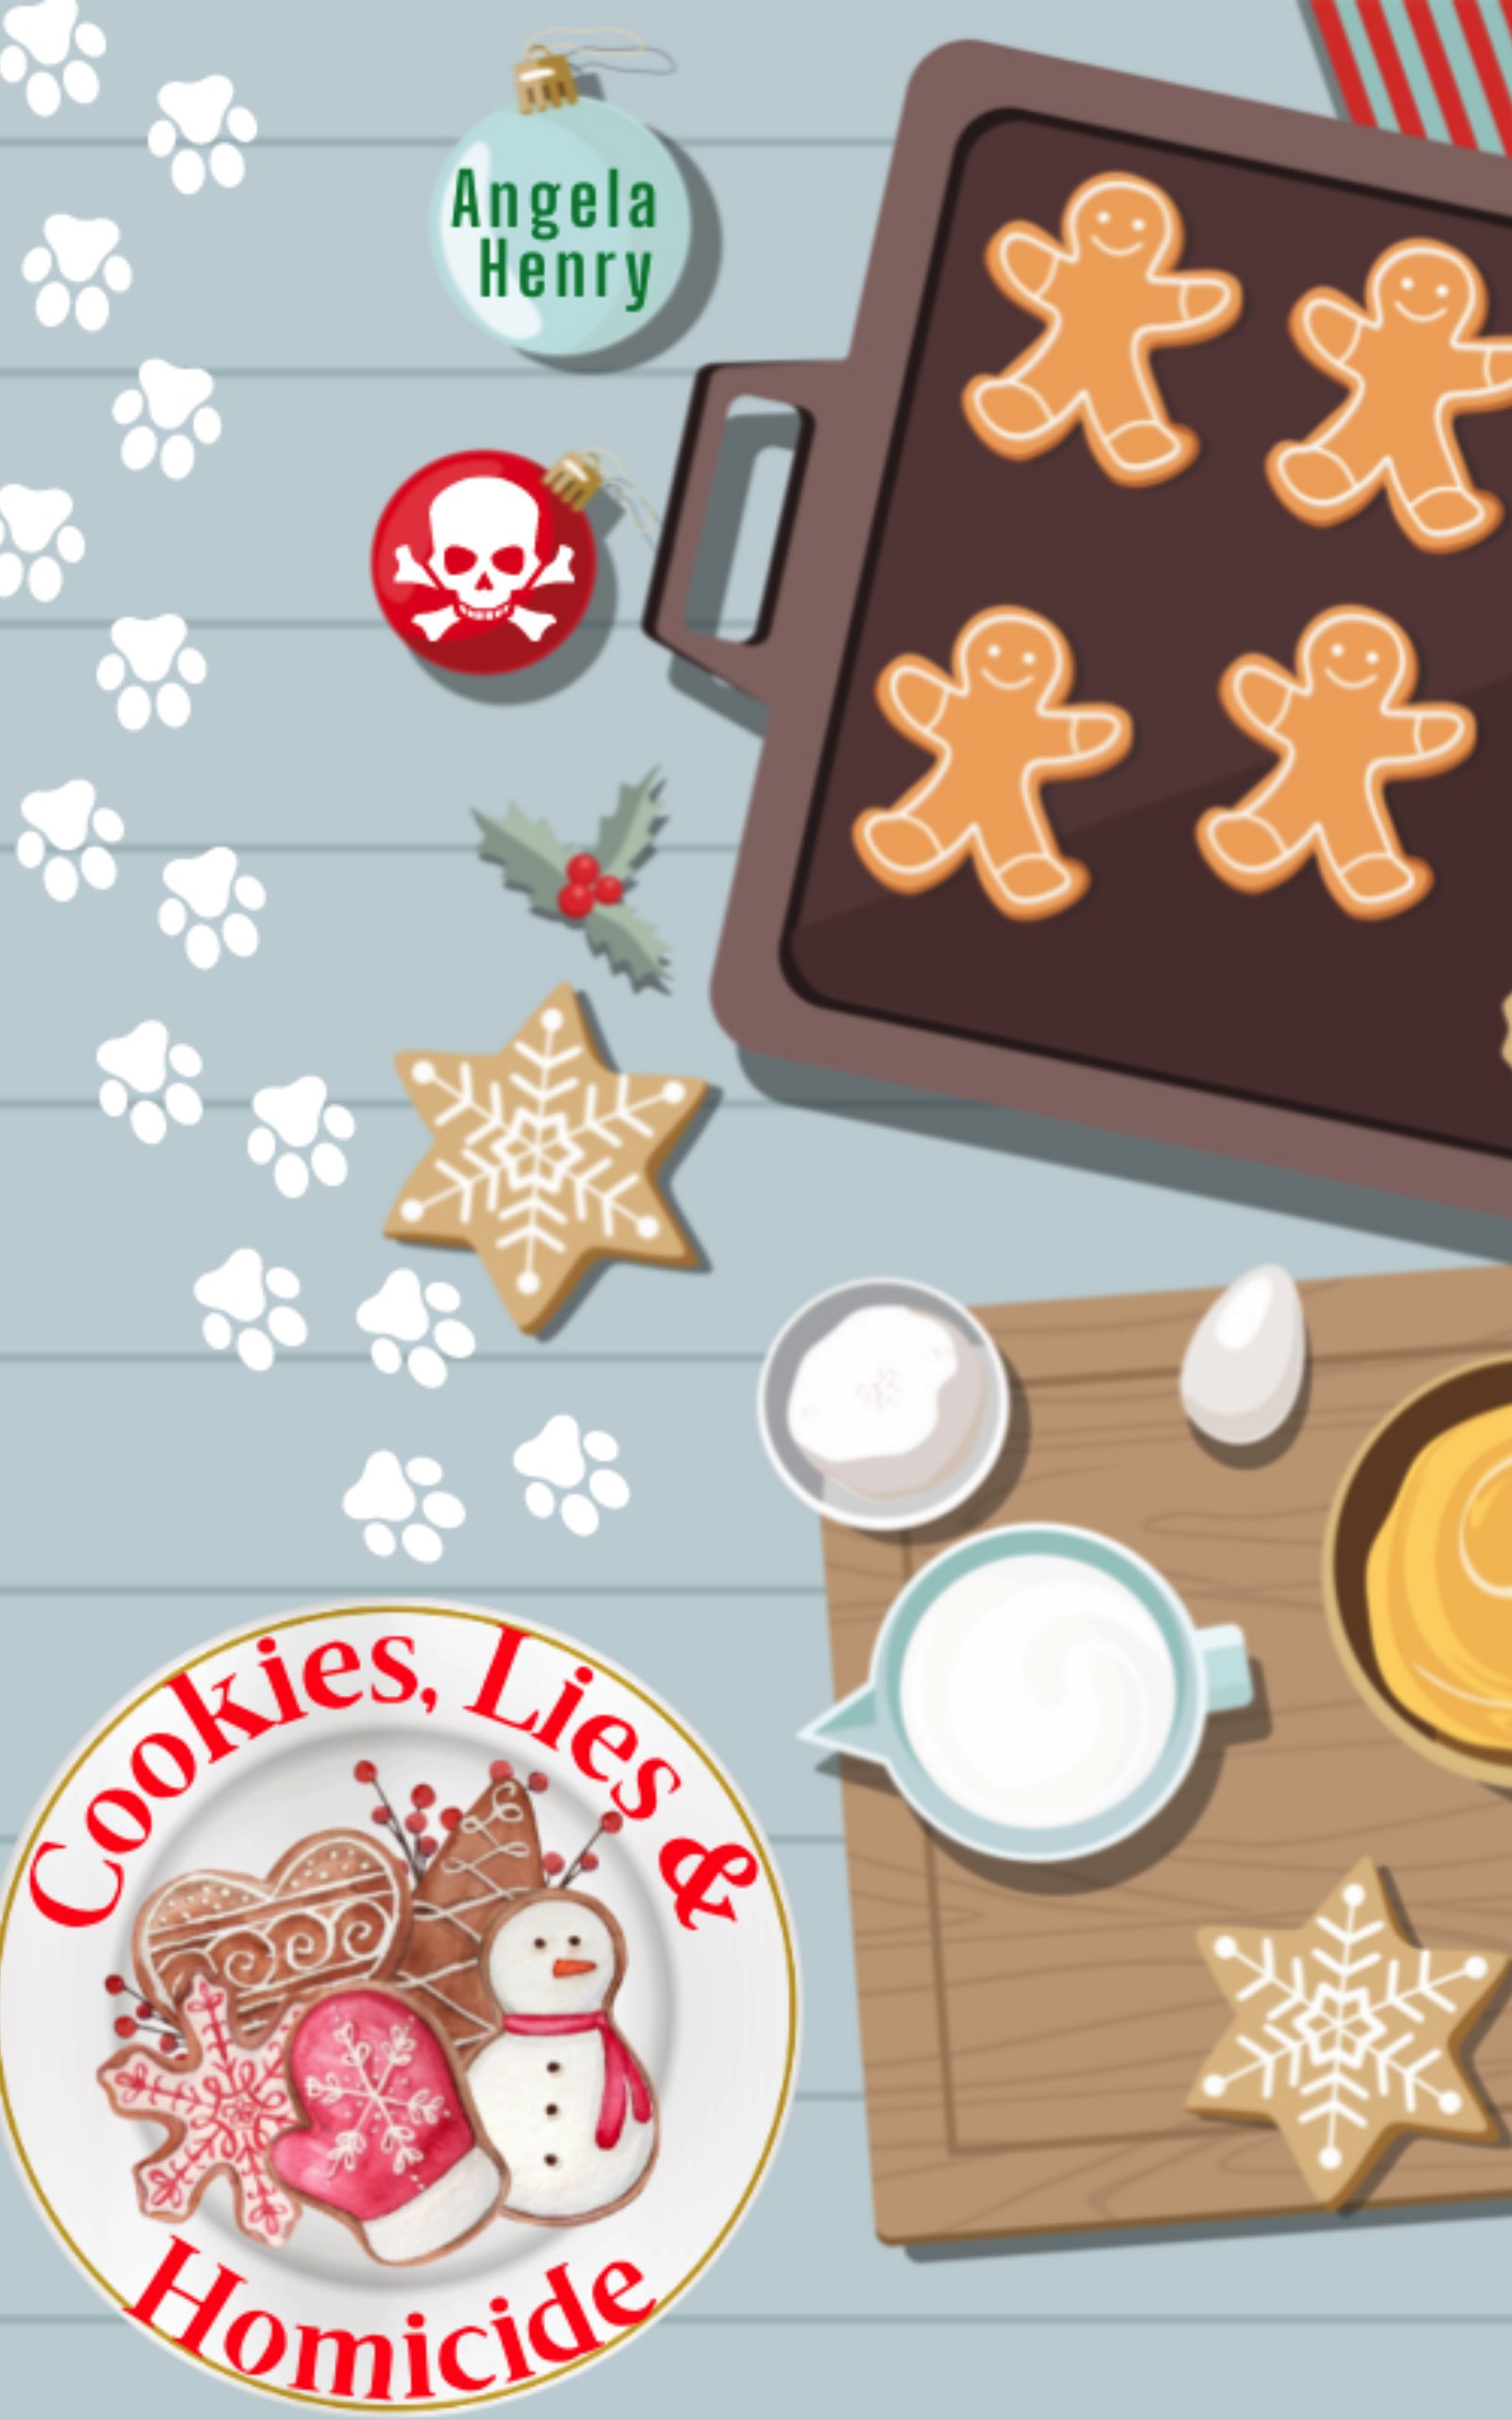 Cookies, Lies & Homicide (a cozy short story with a recipe)